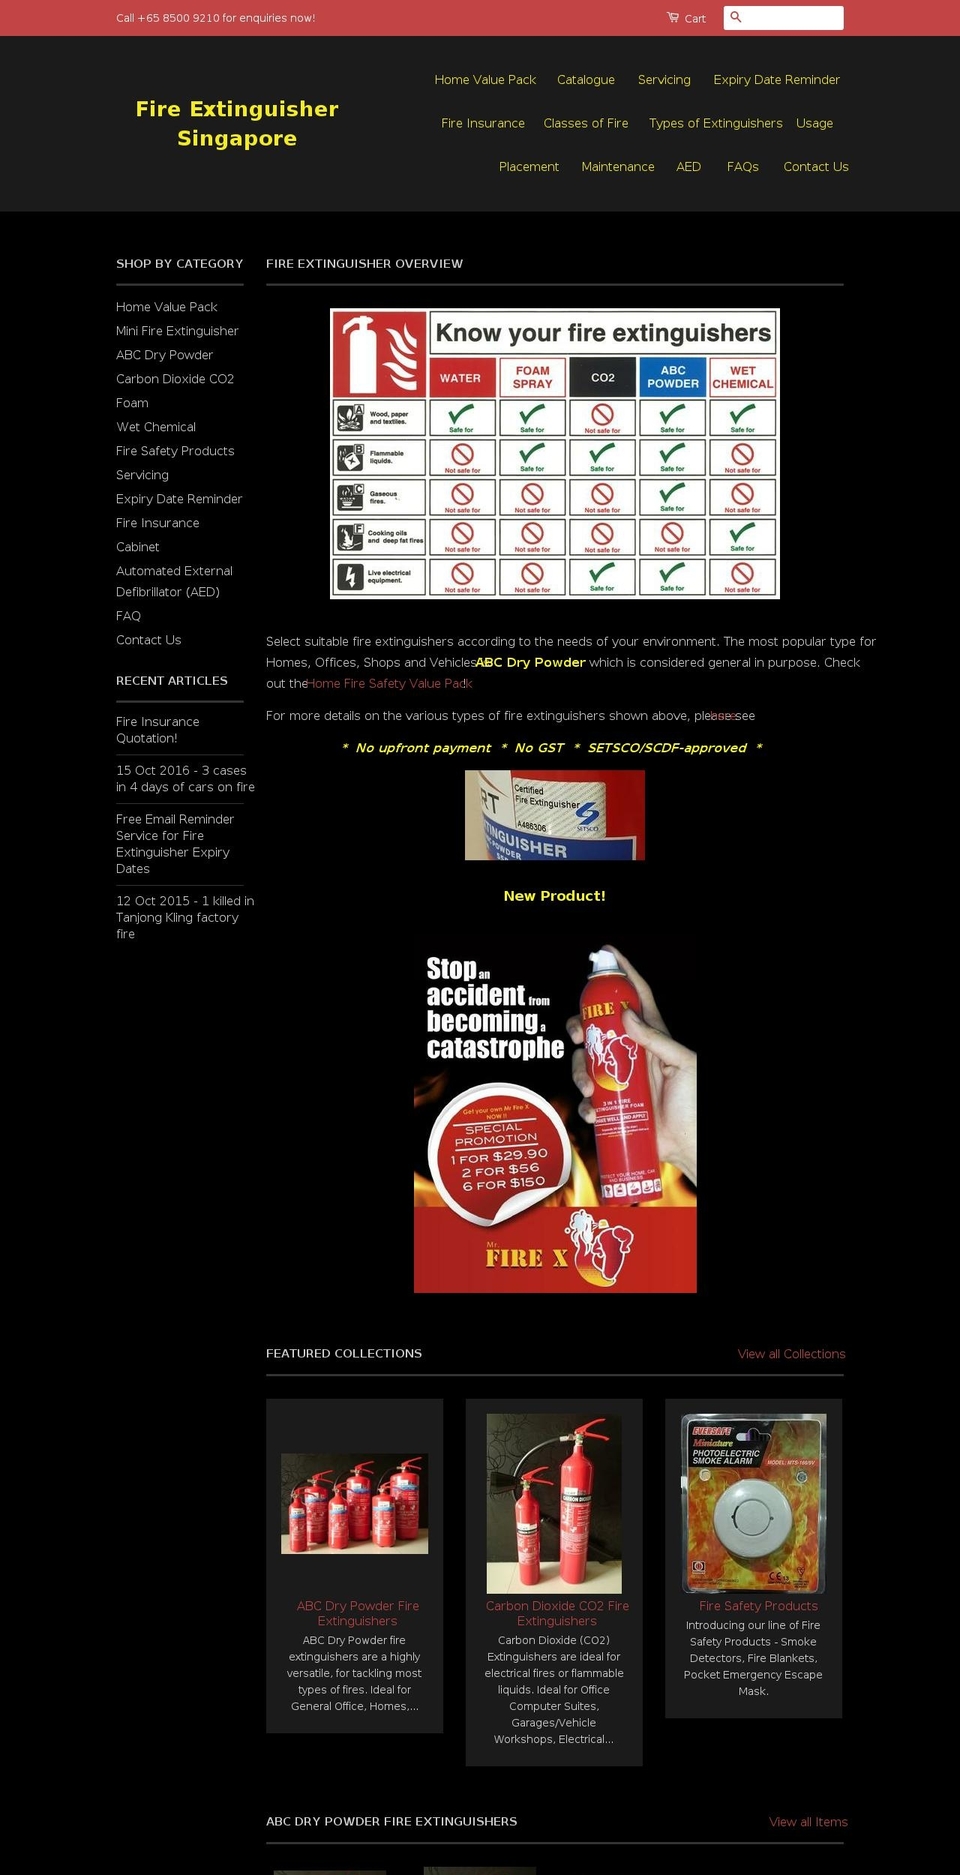 classic Shopify theme site example fireextinguisher.com.sg